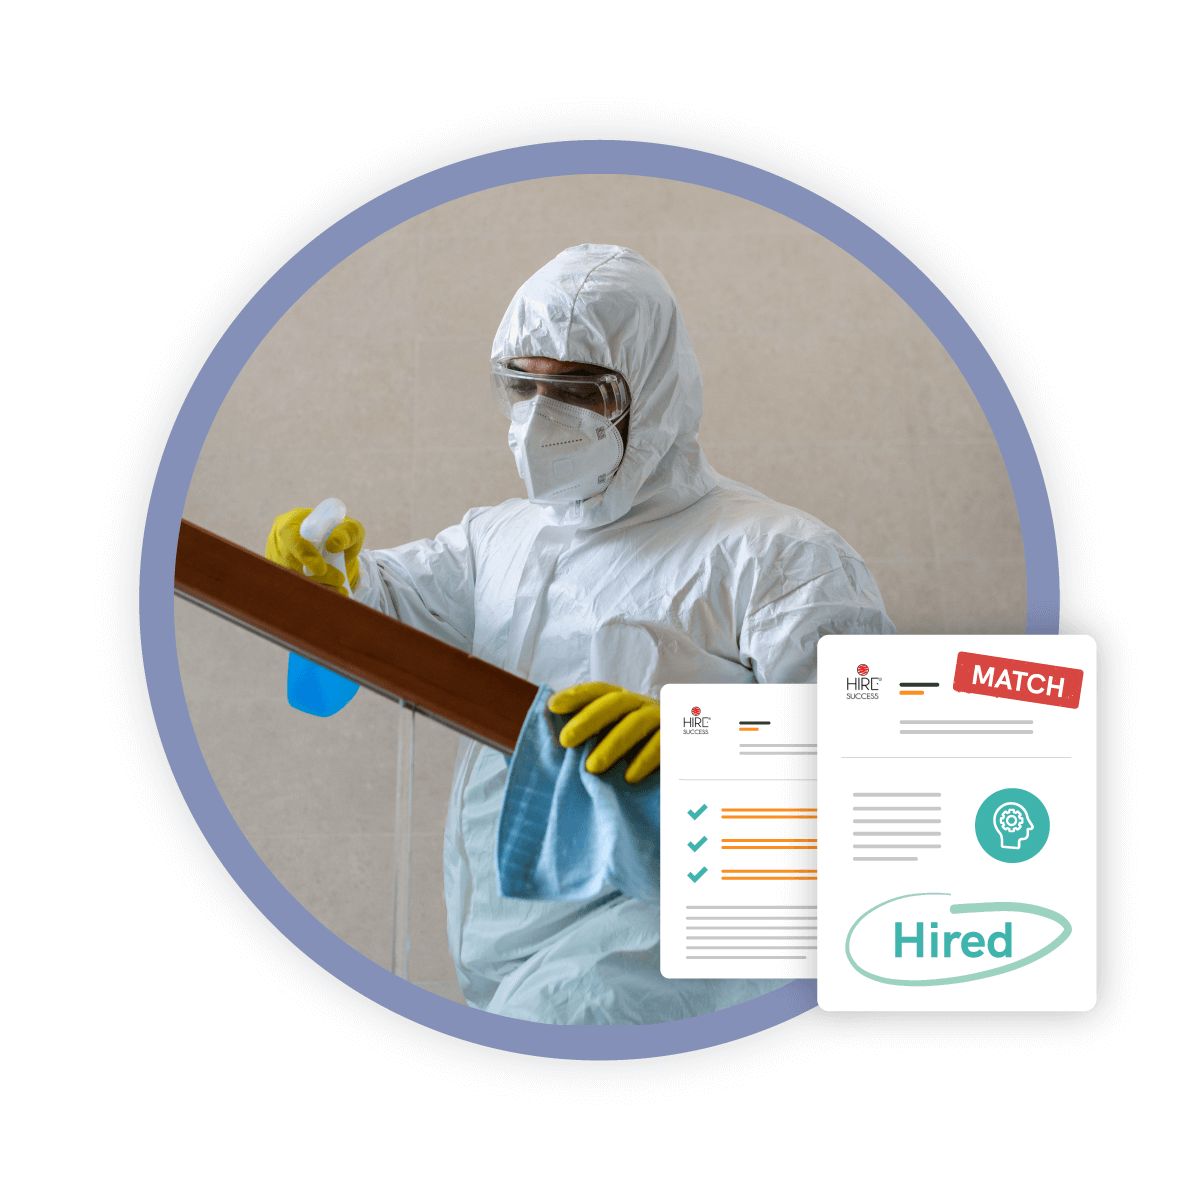 How to hire employees for a commercial cleaning business.